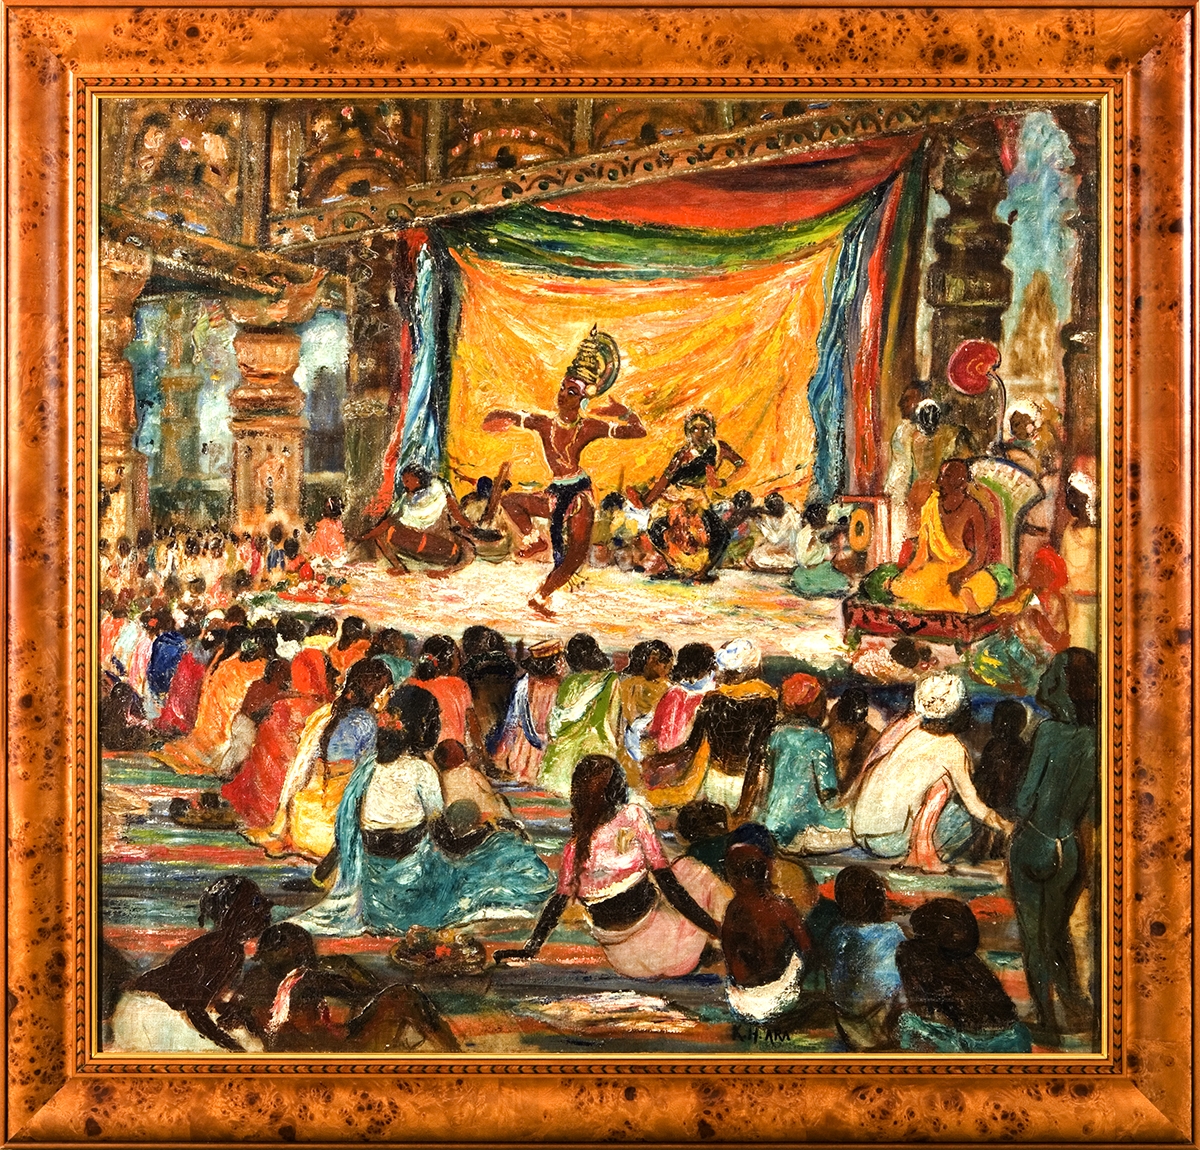 K. H. Ara. Bharata Natya, ca. 1945. Oil on canvas. H. 35 x W. 37 in. (88.9 x 94 cm). Rajiv and Payal Chaudhri Collection. Courtesy of the lender 